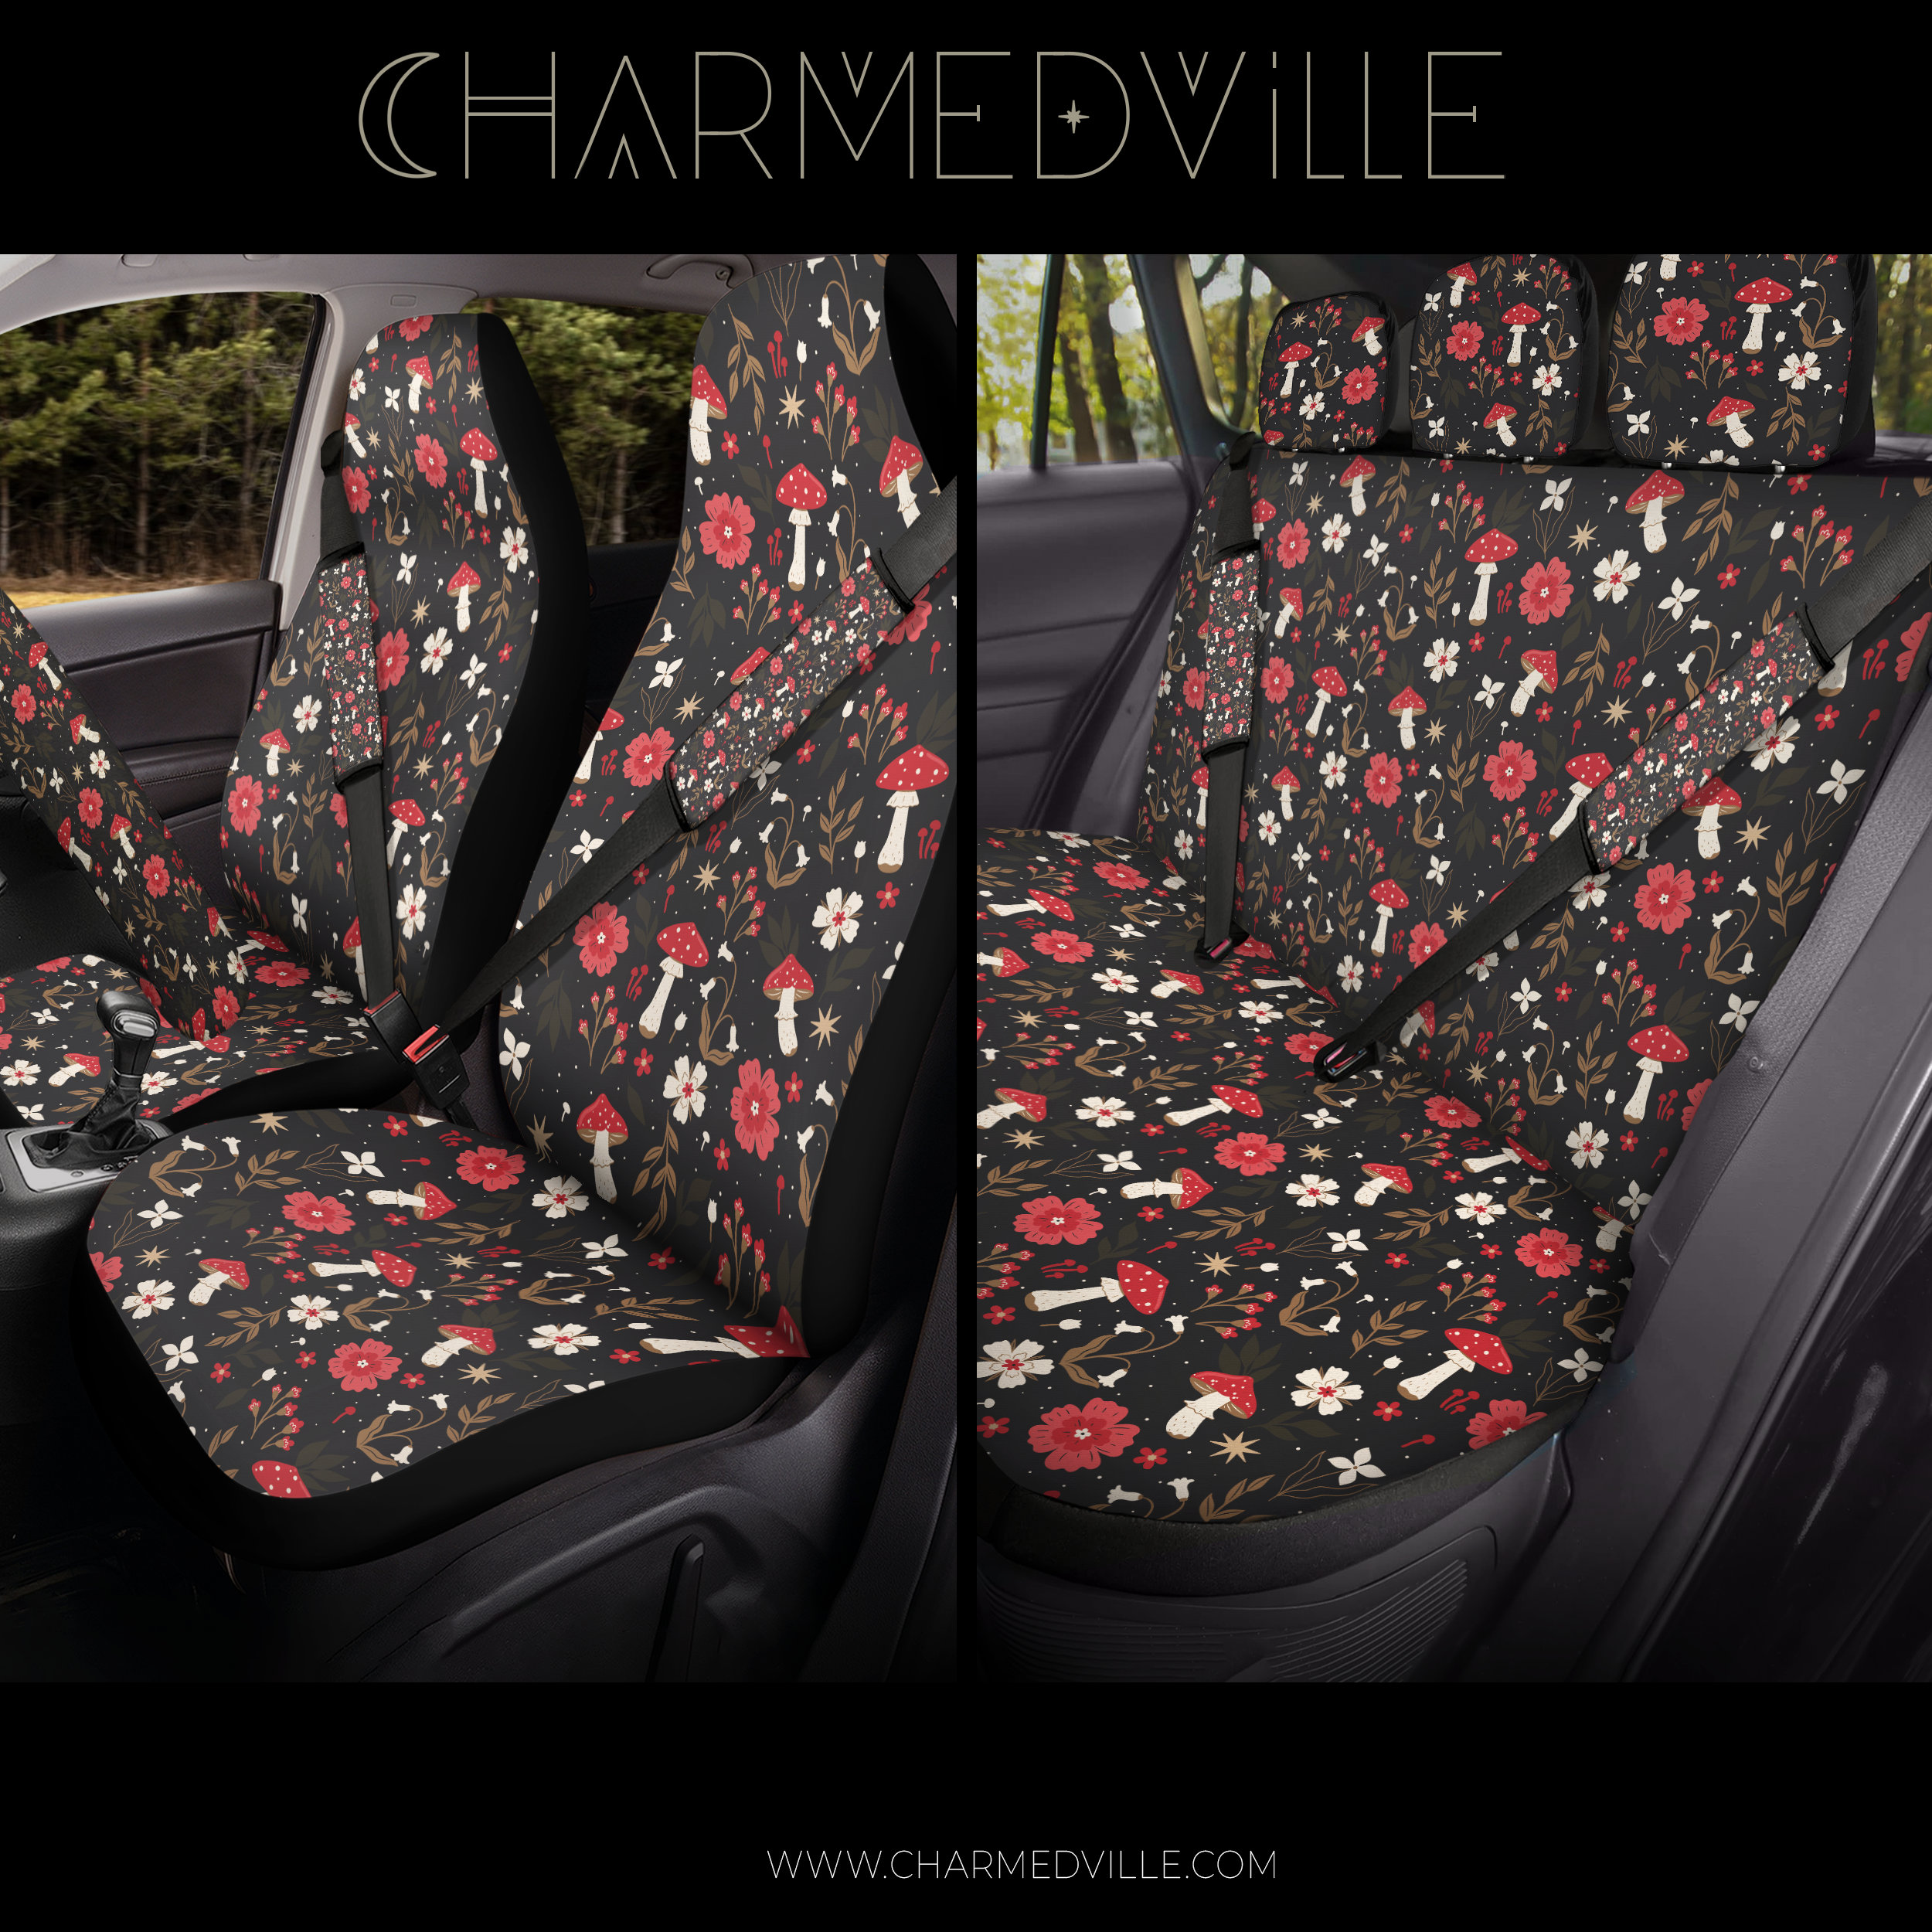 Full red seat covers - .de